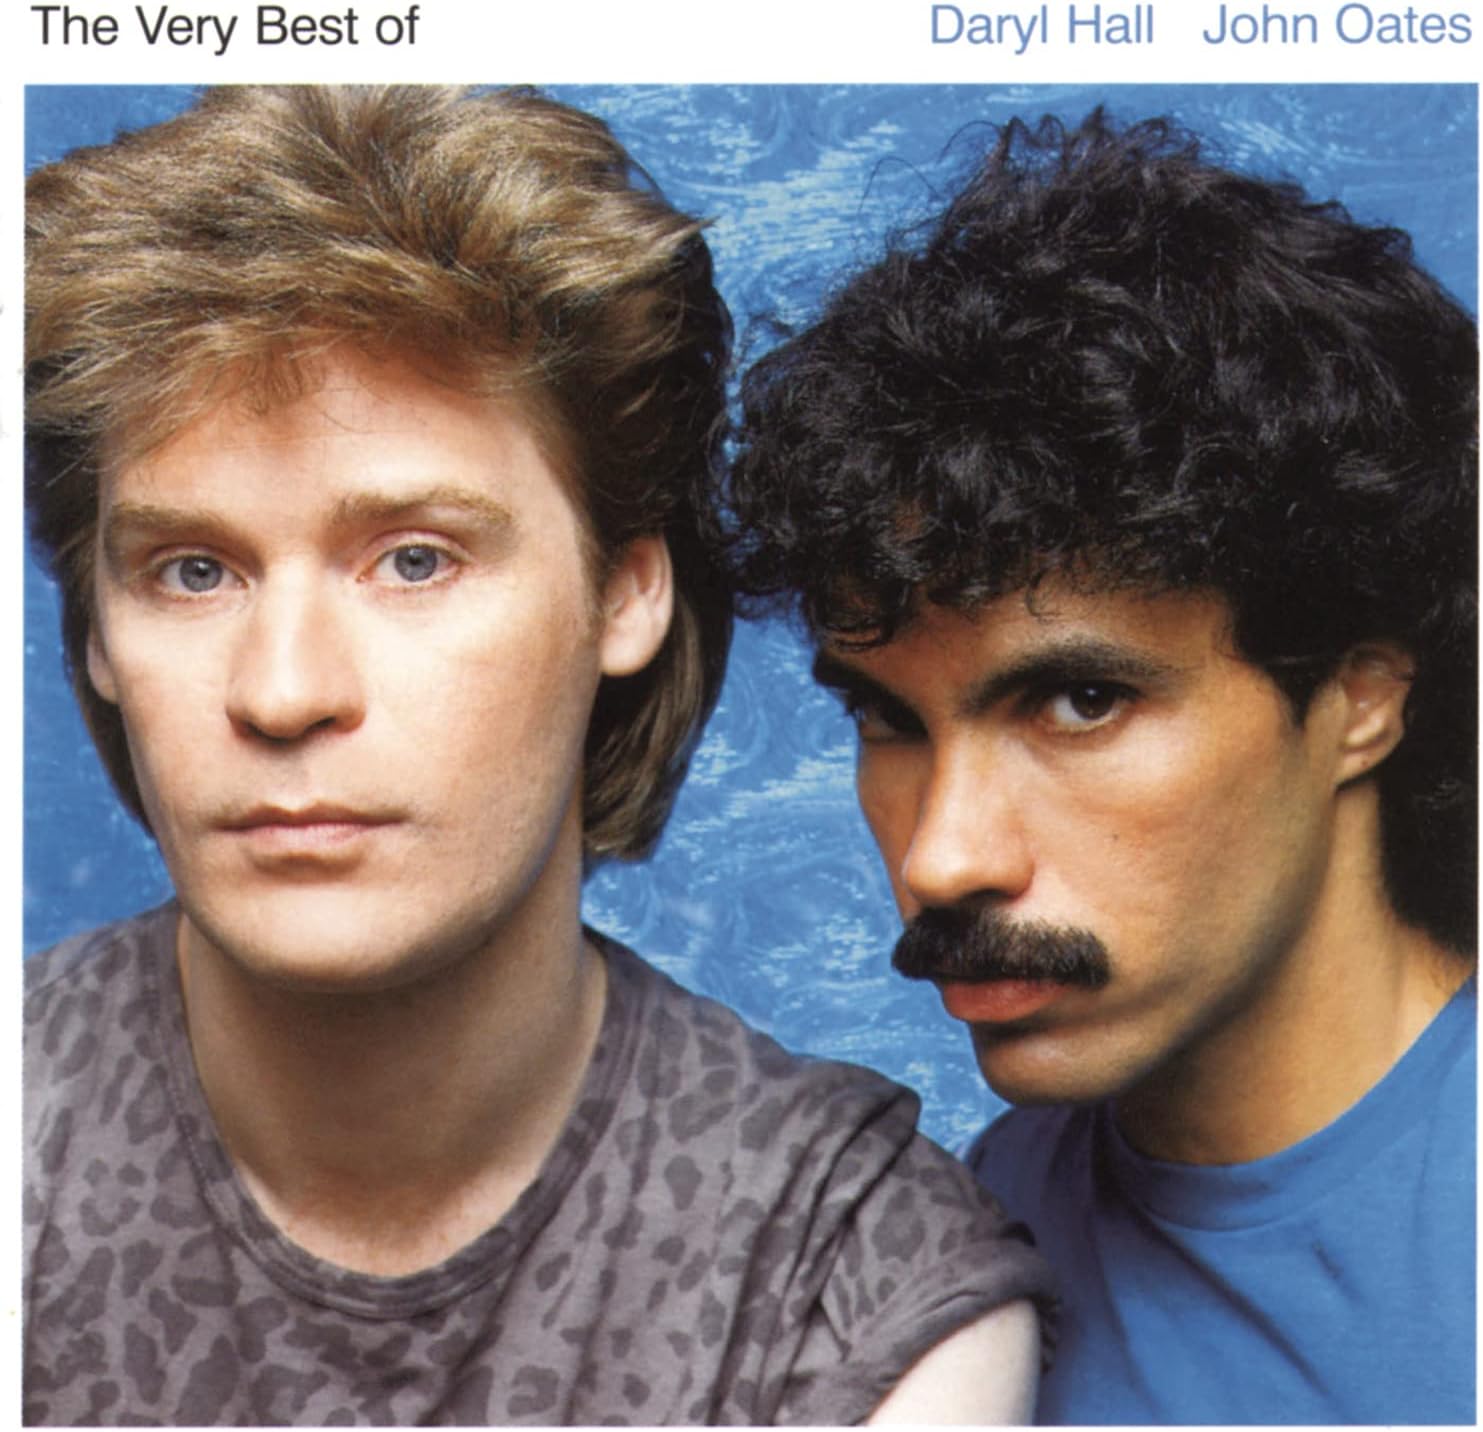 The Very Best Of - Hall and Oates | Daryl Hall, John Oates